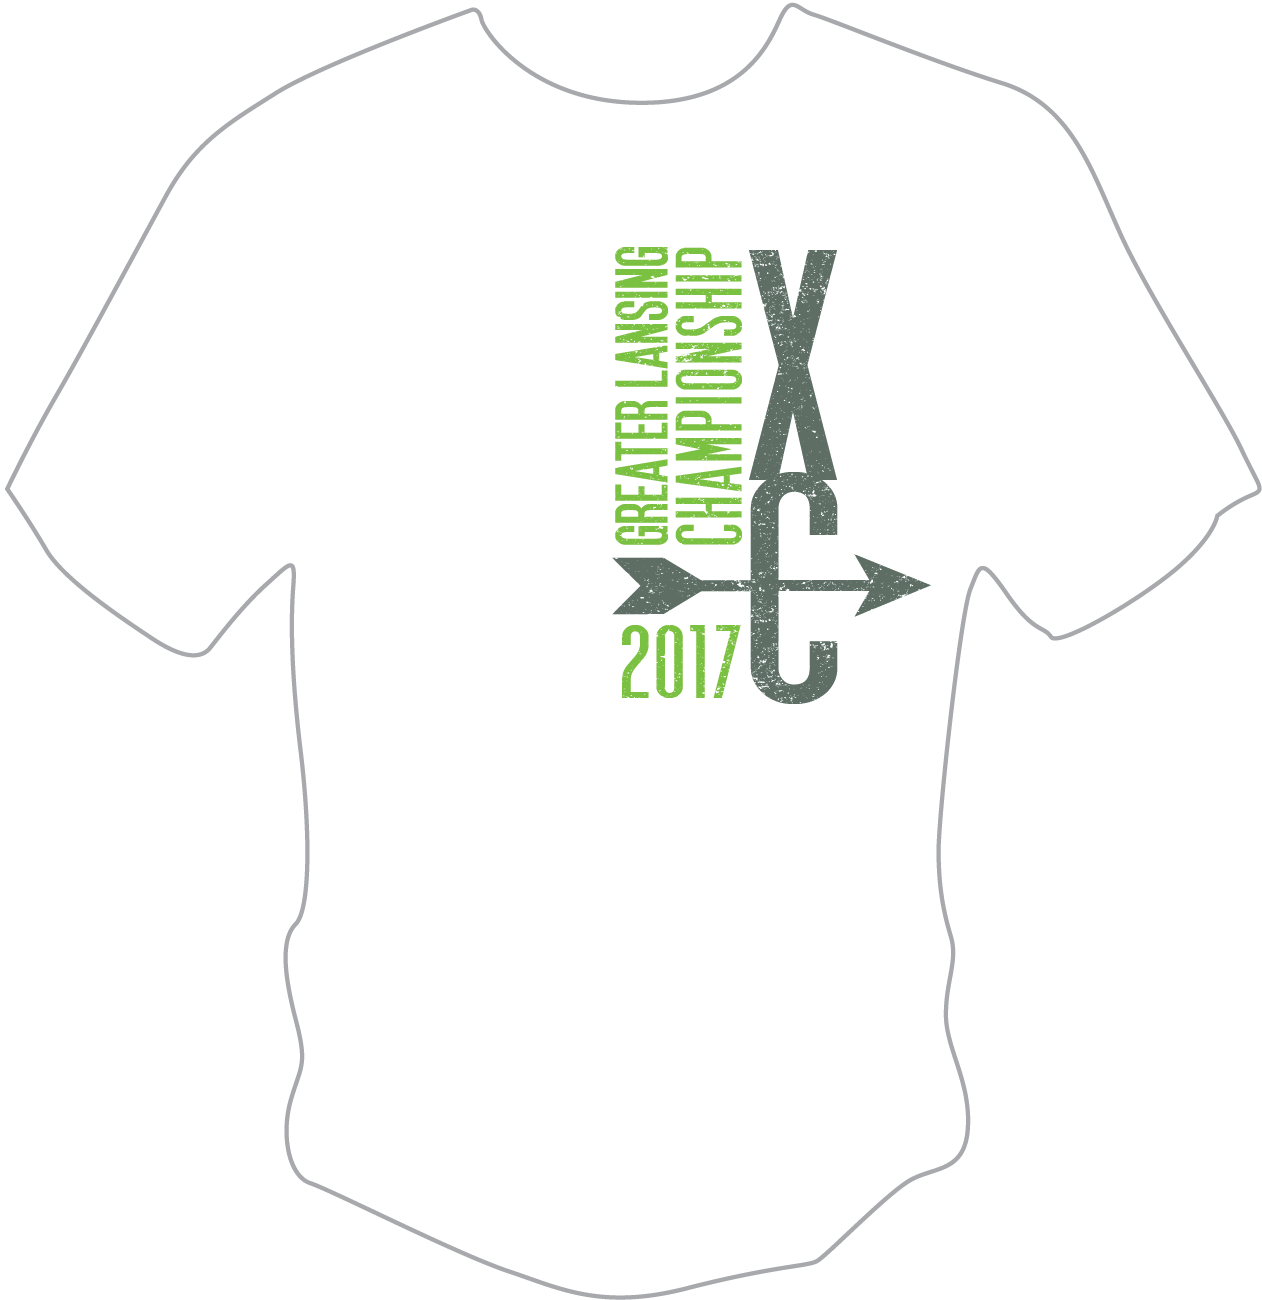 Greater Lansing Cross Country Championship - Cross Country City Champions Shirts (1262x1300)